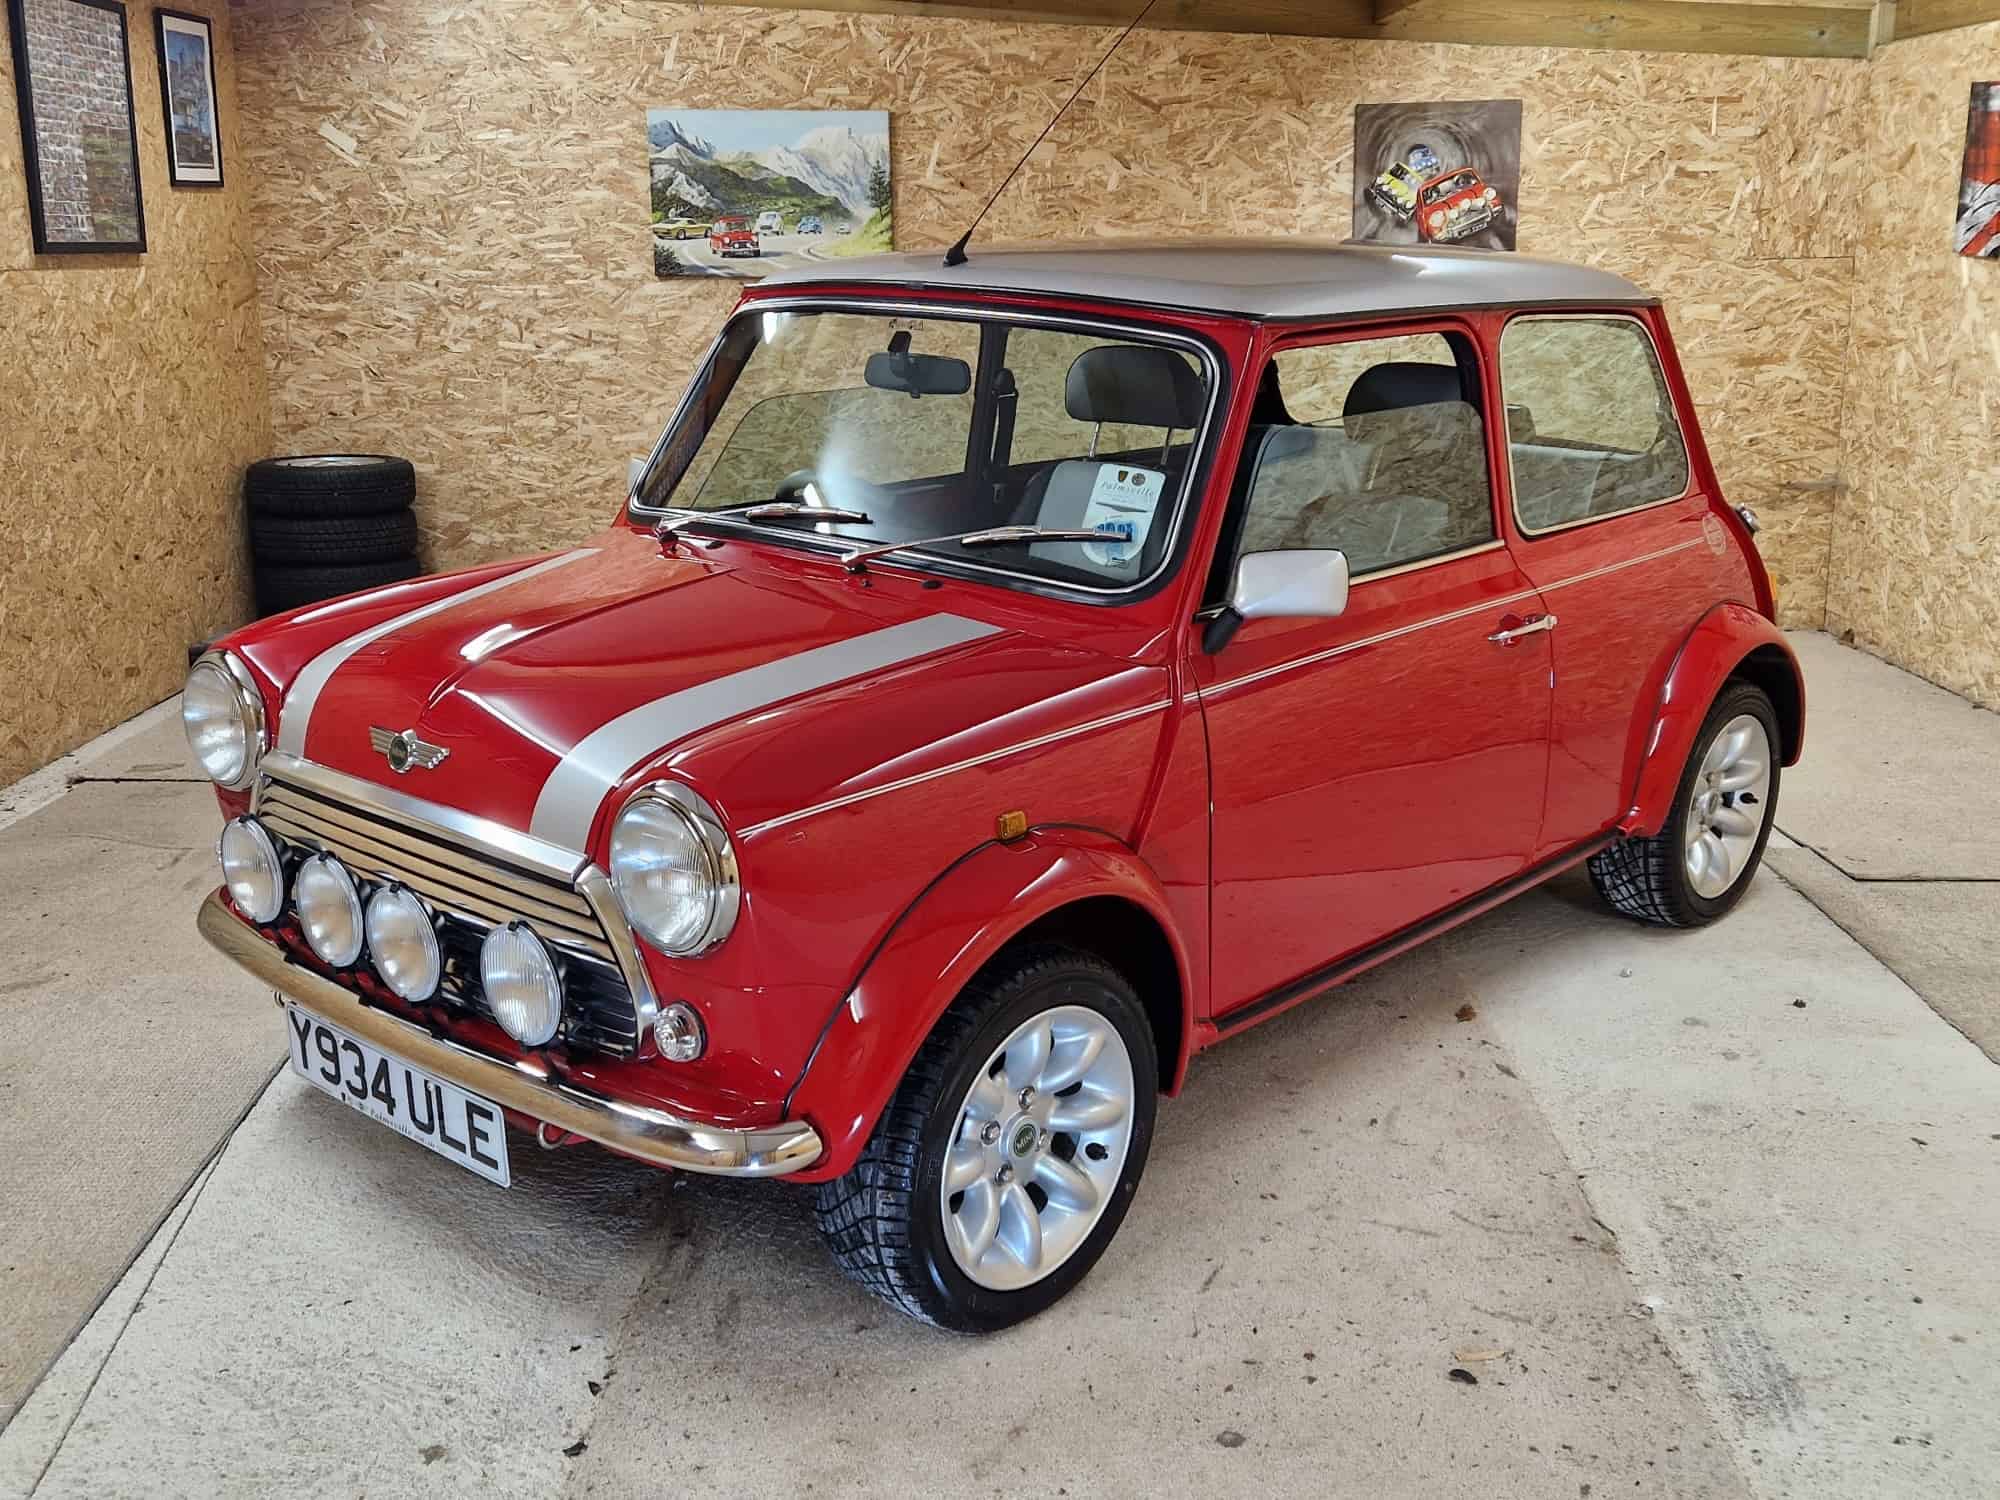 ** NOW SOLD ** 2001 Y Mini Cooper Sport 500 In Outstanding Condition. Just 881 Miles From New!